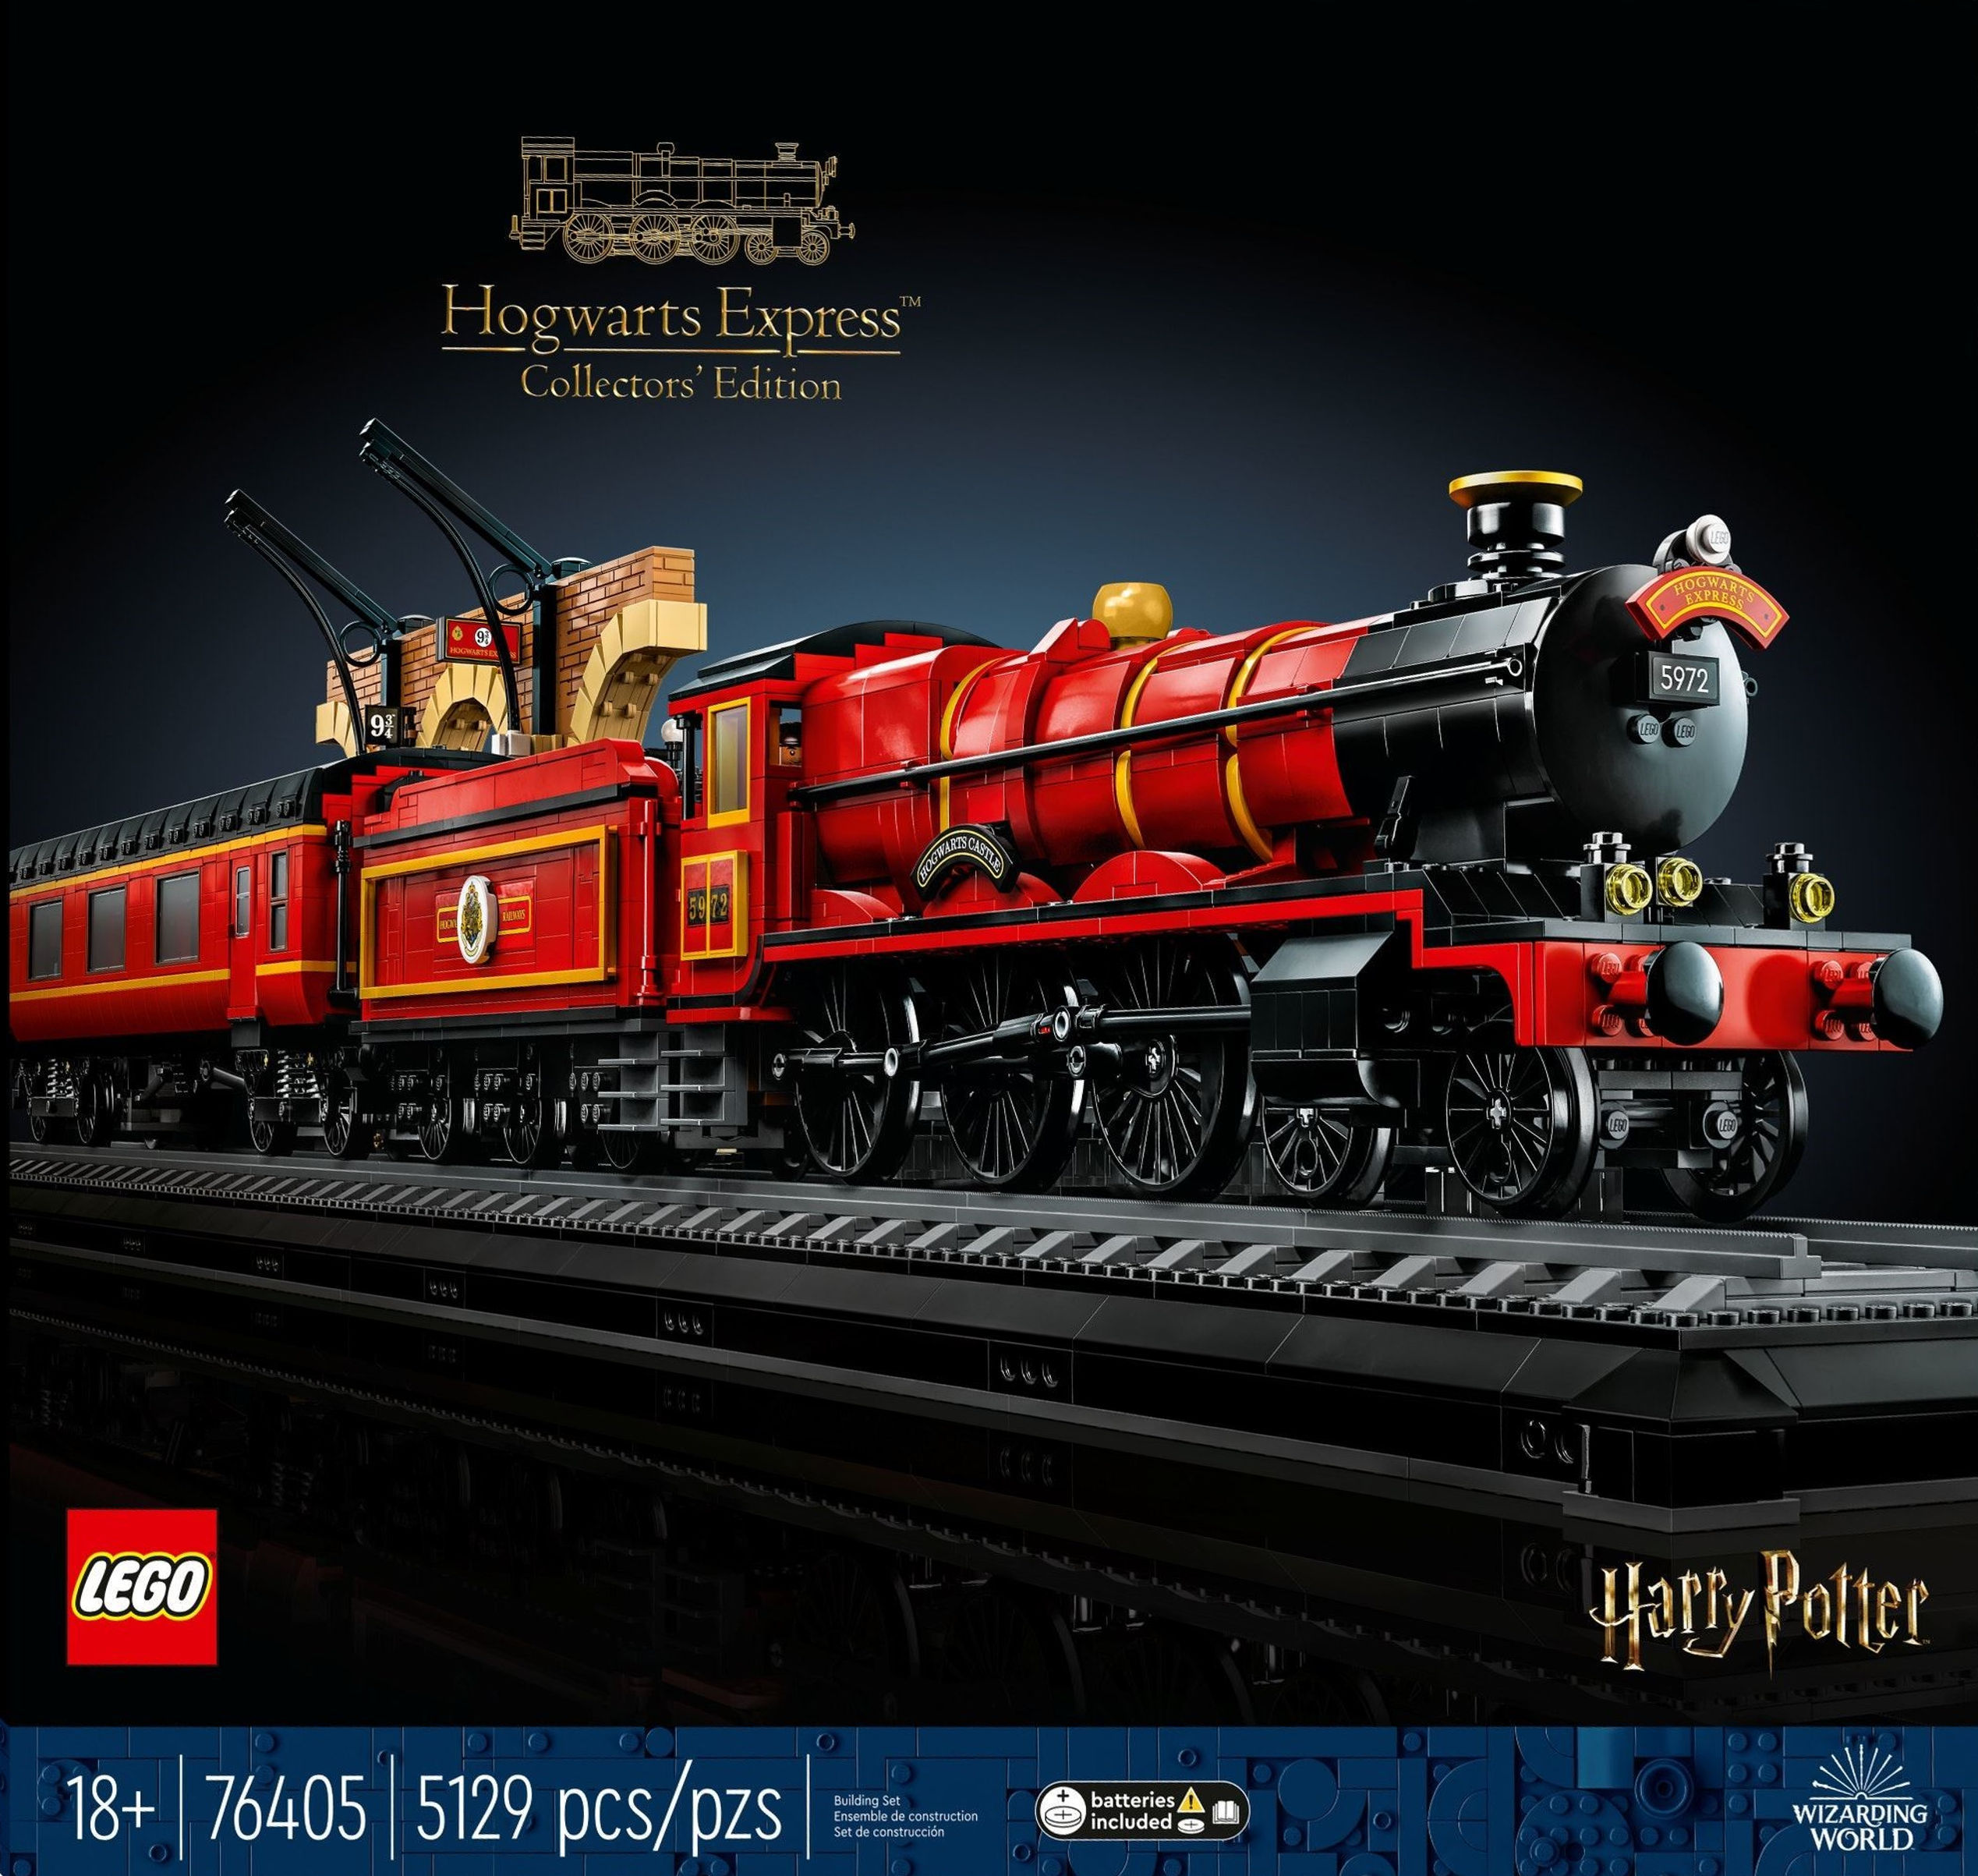 Train Falcon de Luxe Full Steam Ahead Trains Paint By Numbers Kit